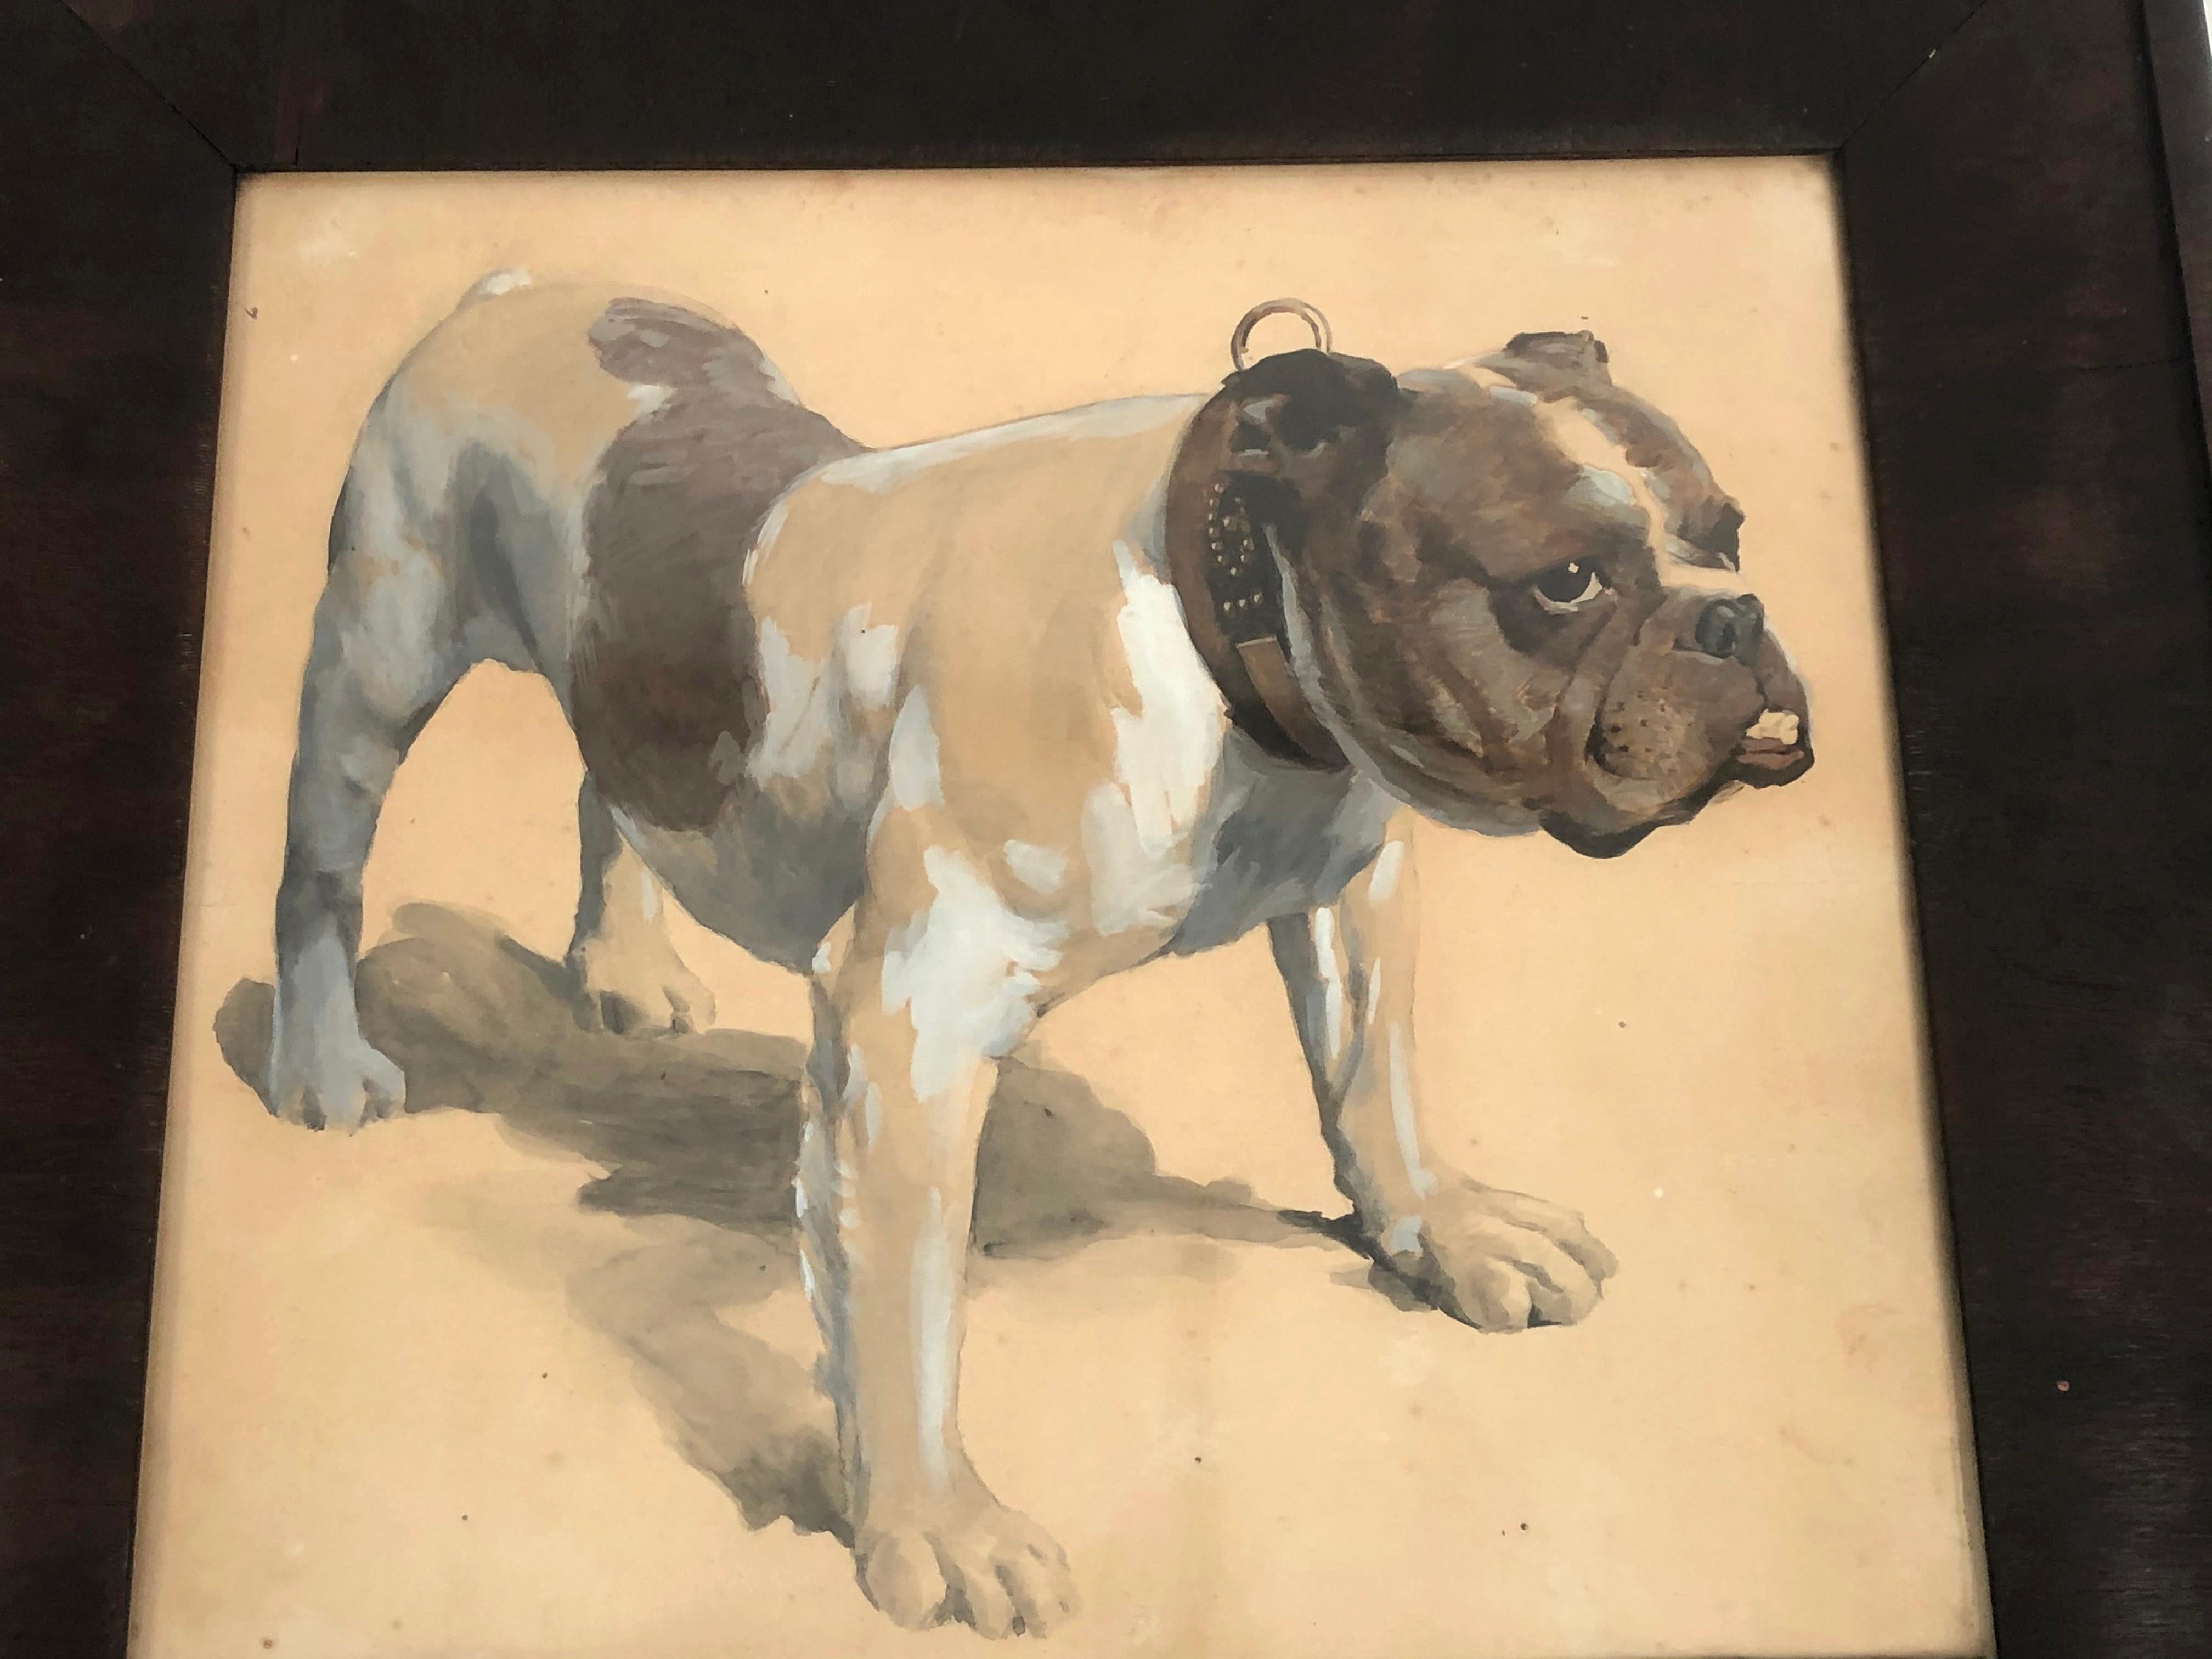 A gouache drawing of a bulldog, beautifully and expressively rendered in white, brown, grey and black pigment on tan paper, the bull dog standing on all fours with an alert expression and glint in his or her eye, and wearing a brass studded leather